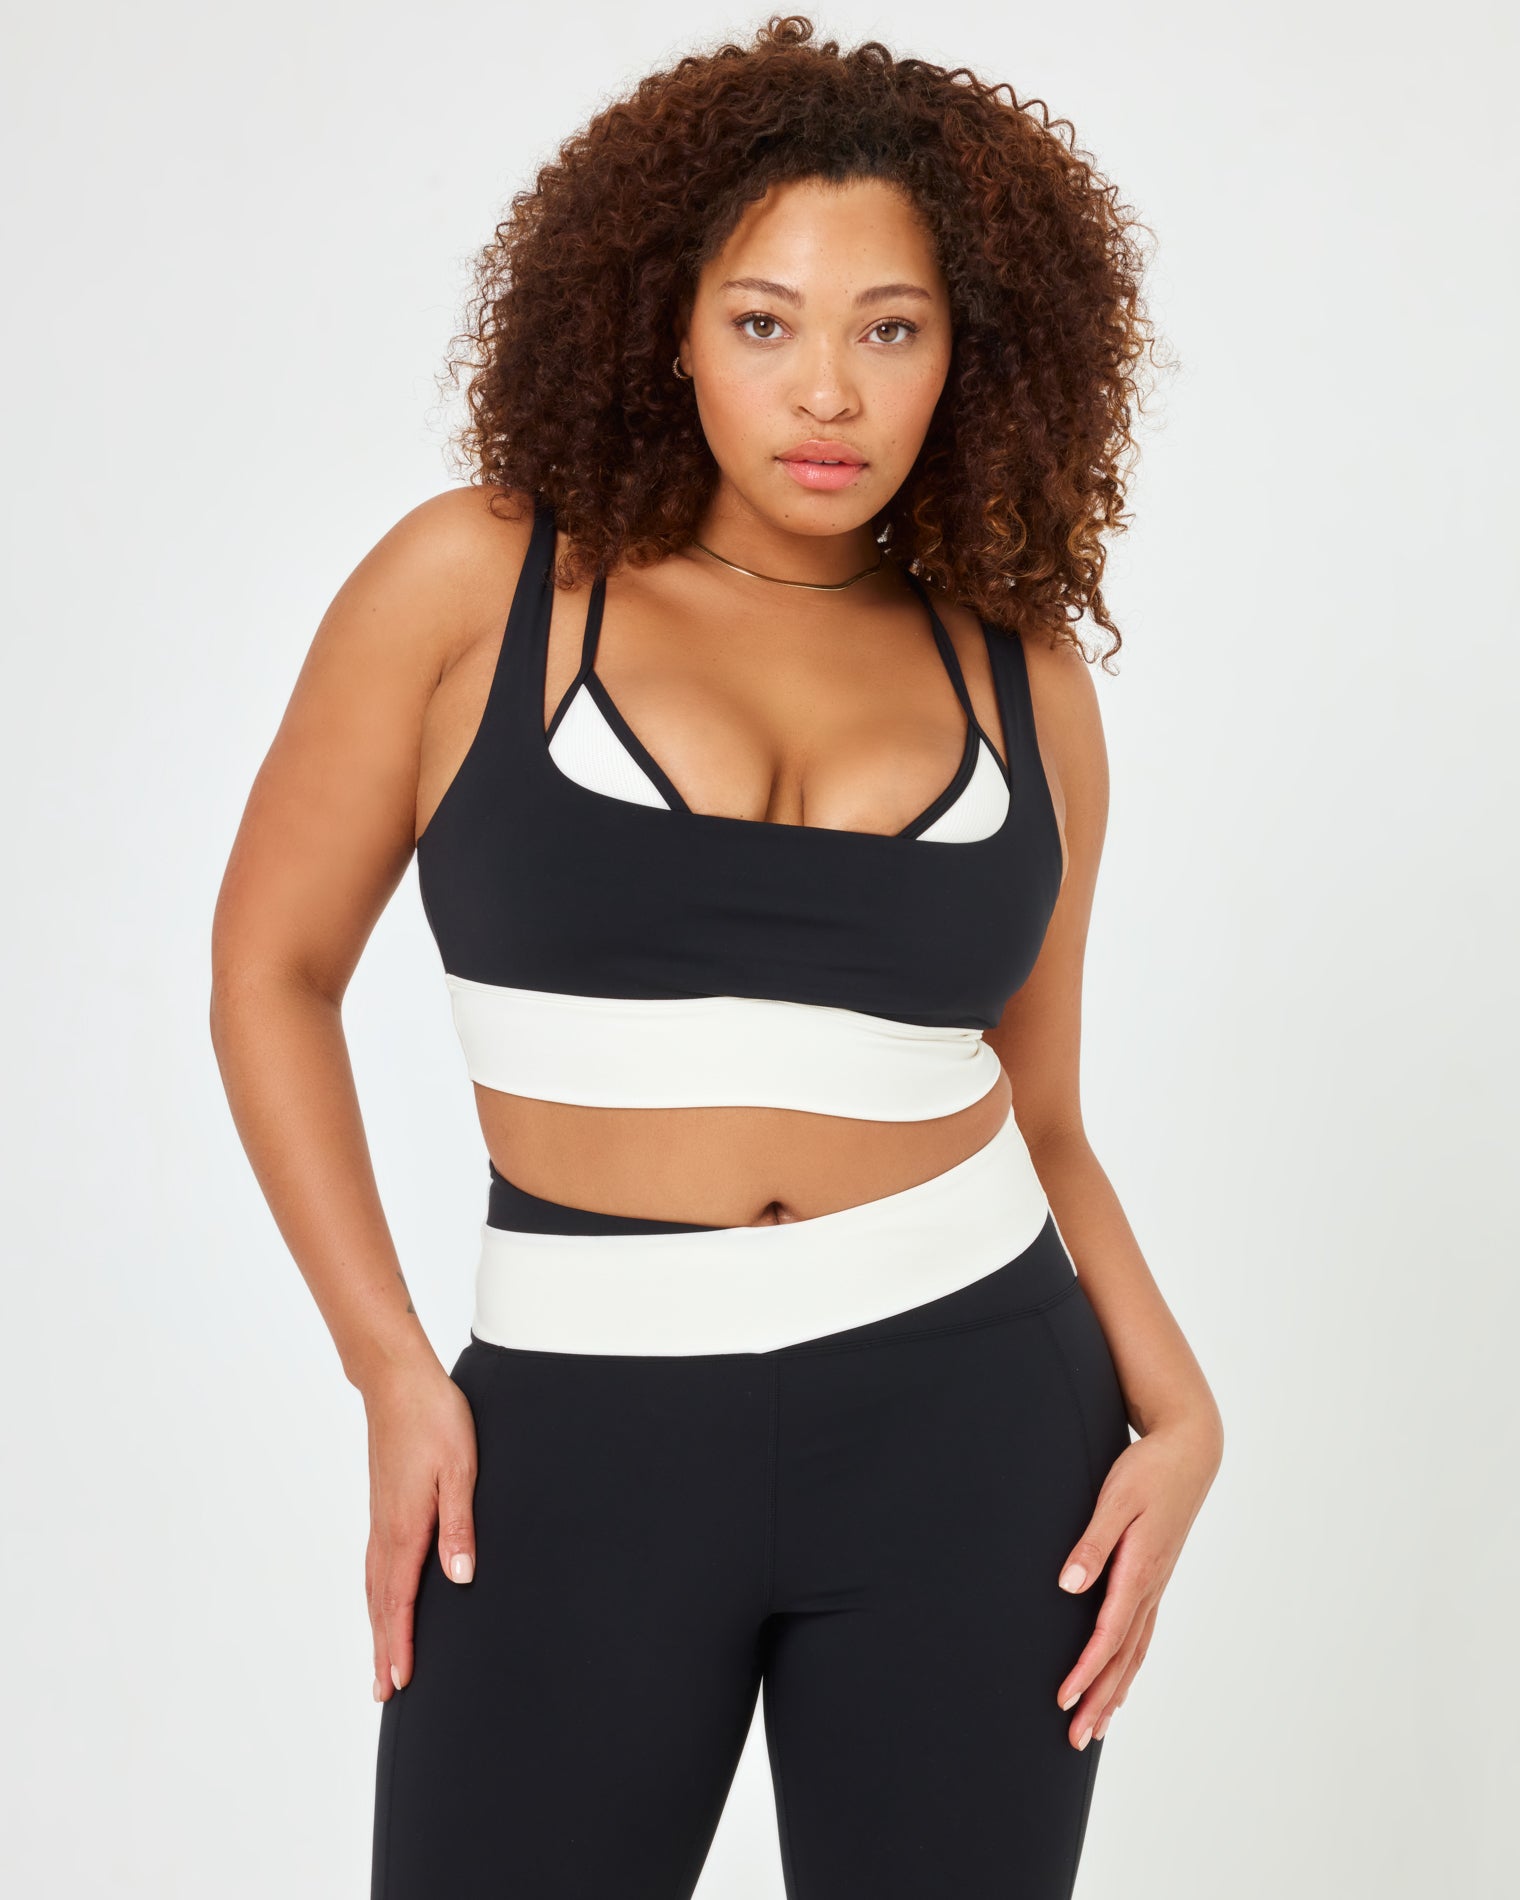 Activewear try on & review for Kamo Fitness! I personally adore